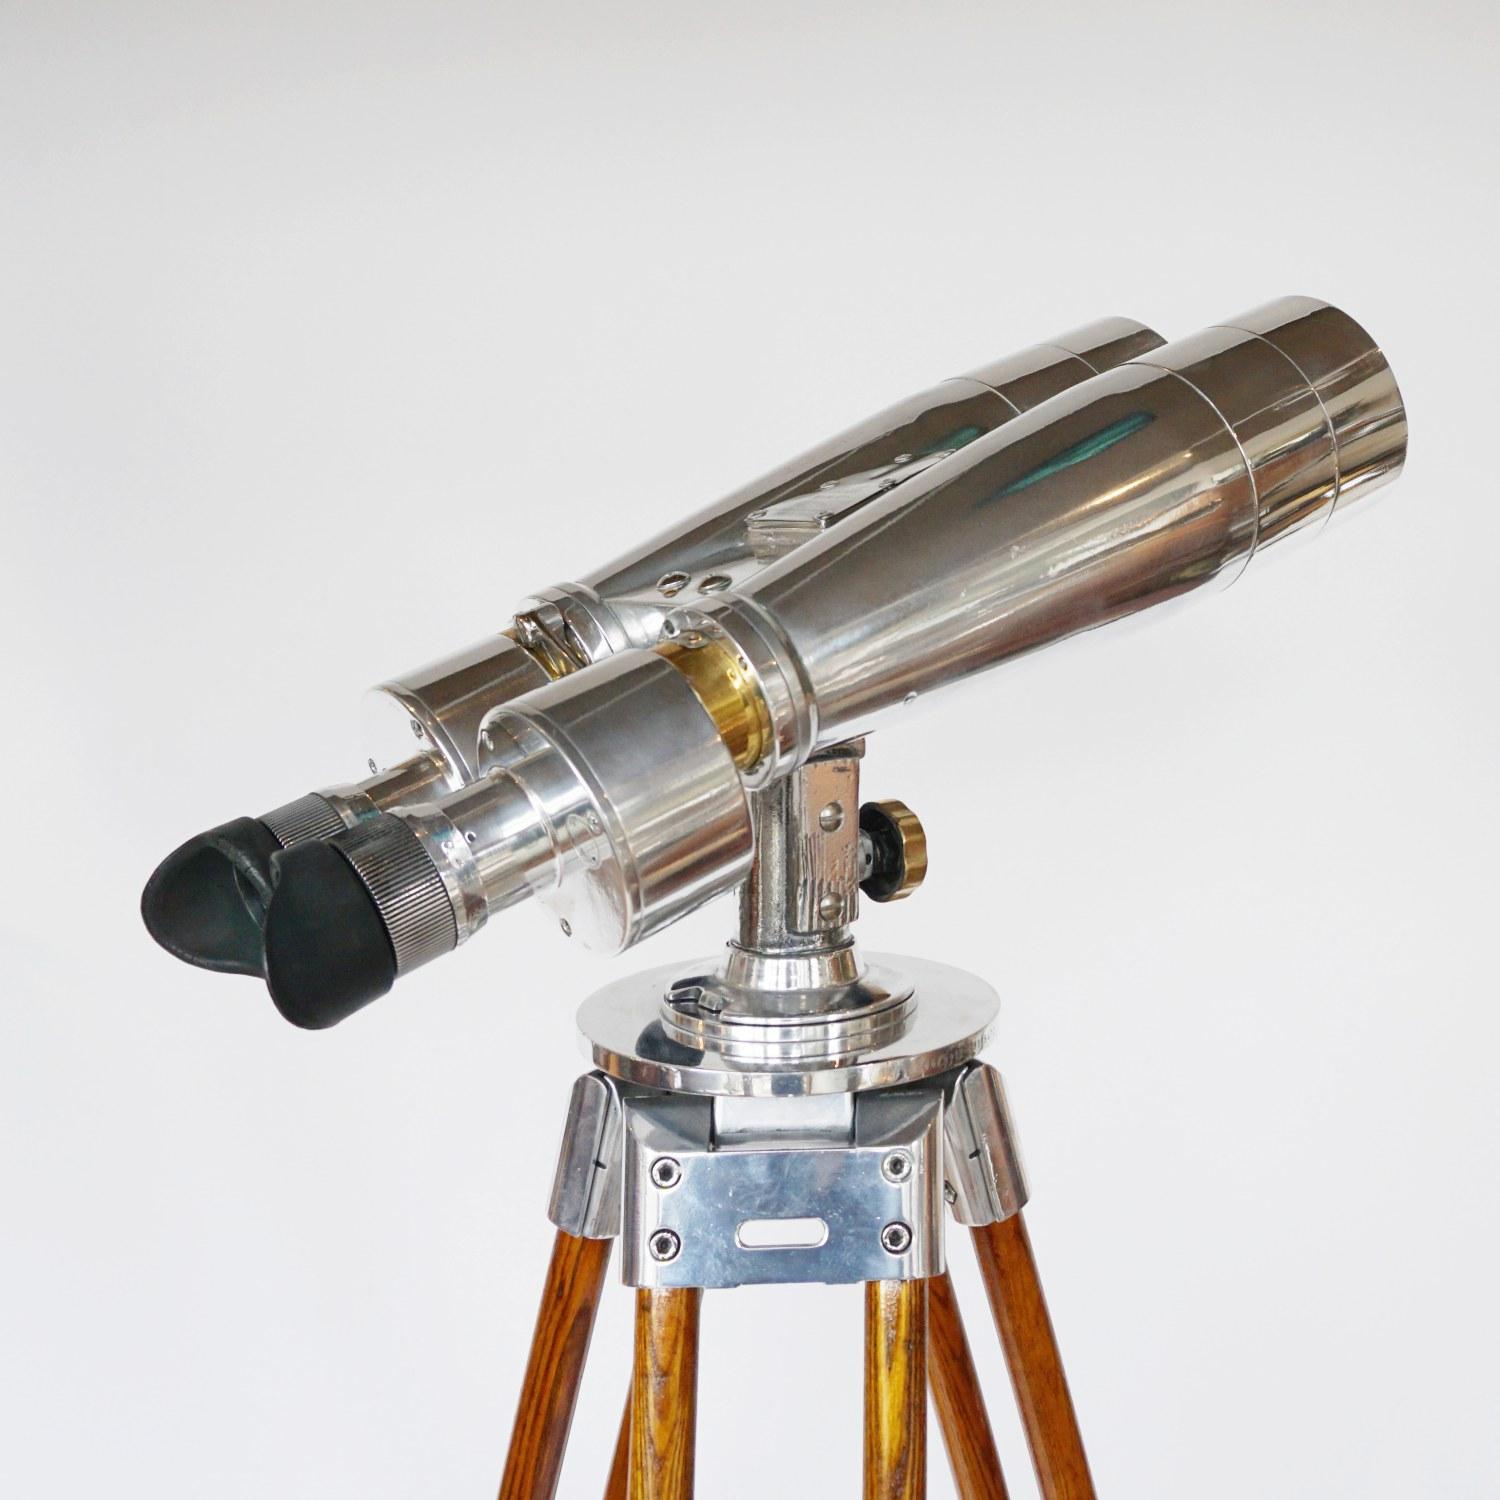 Fuji Meibo 15X80 marine binoculars on later extending wood and chromed metal stand with chromed conical feet. 15X magnification with 80m objective lens. 

Numbered 6526.

Stamped Fuji Meibo and numbered. 

Dimensions: H 50cm W 21cm Length 50cm